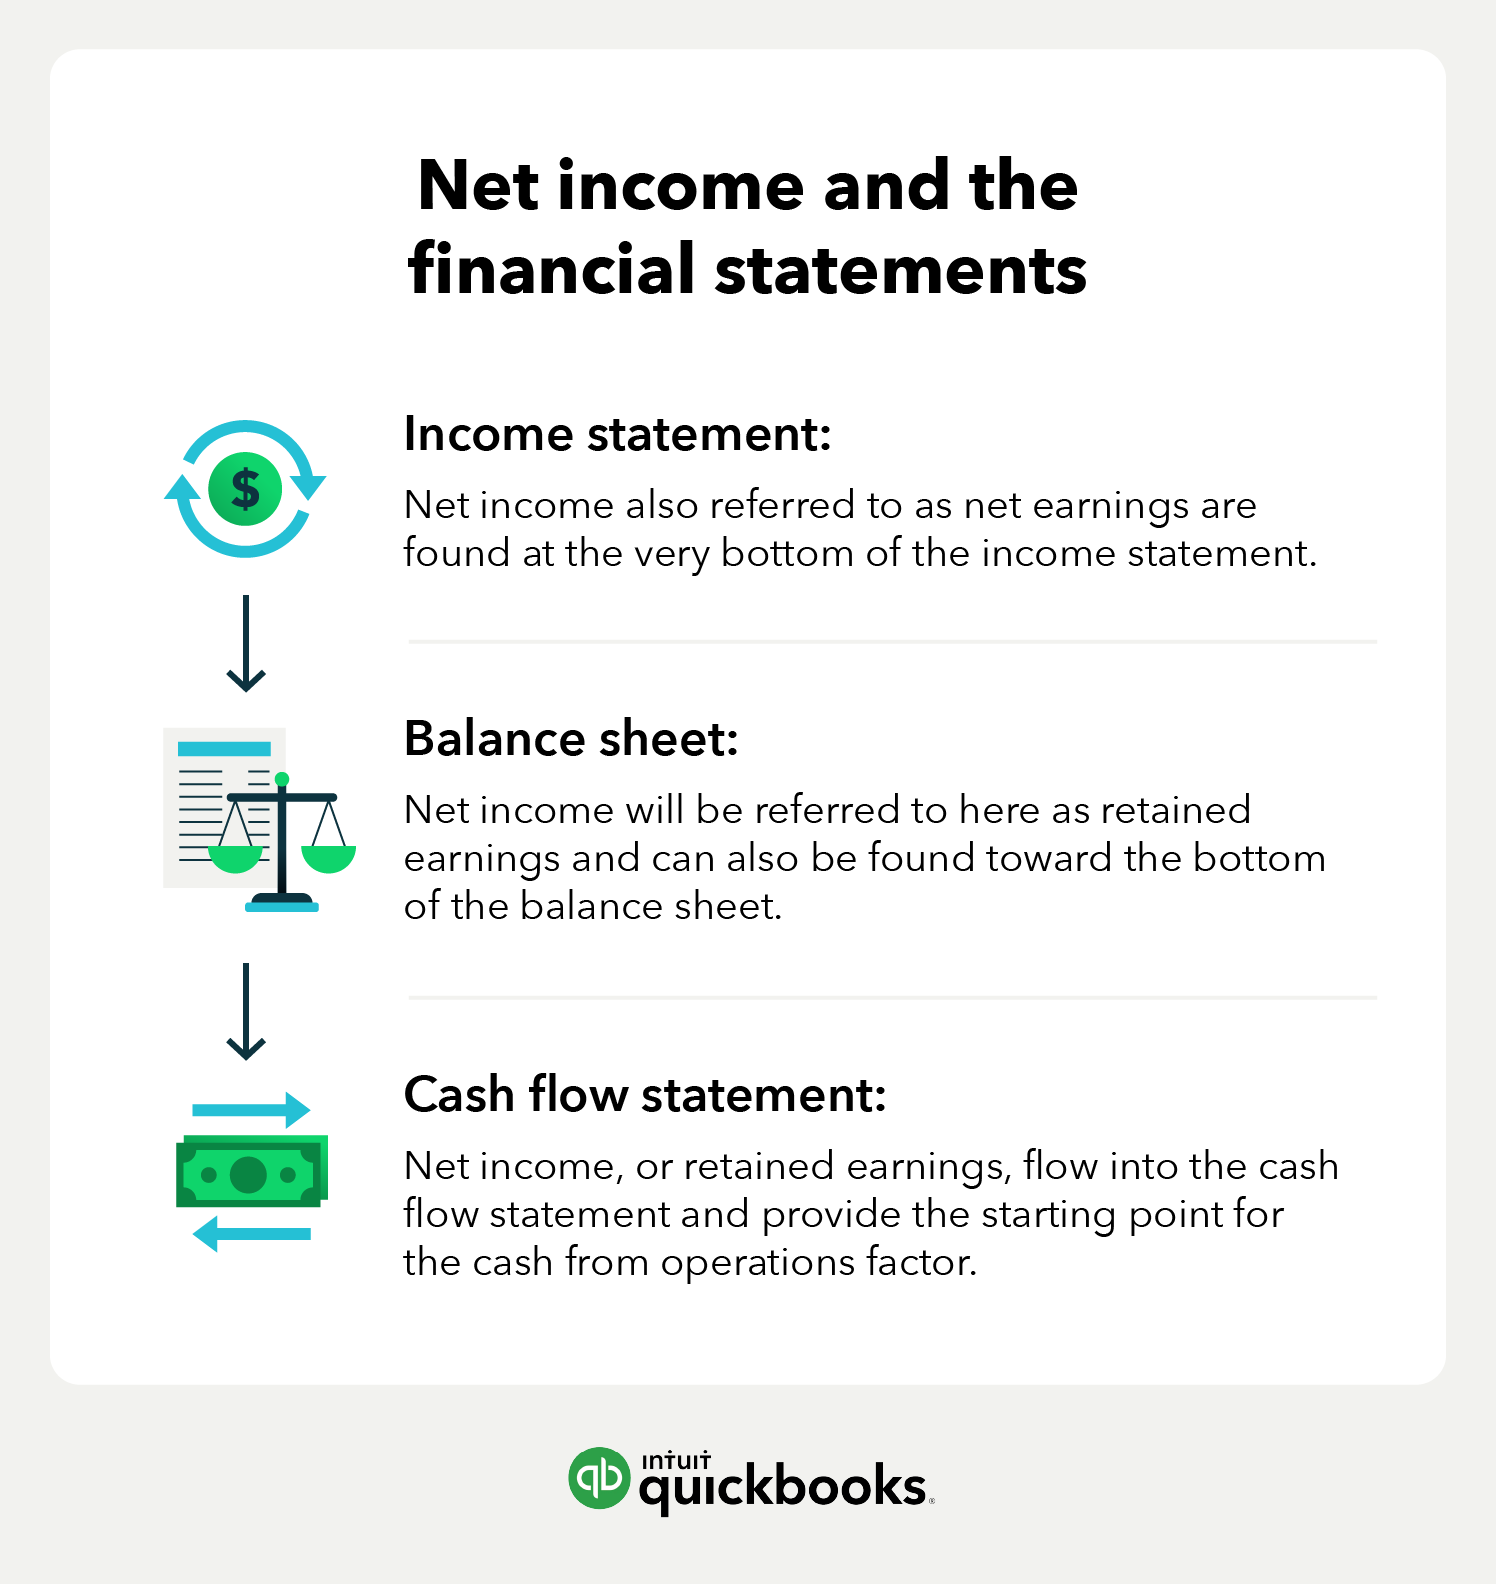 Net income and the financial statements